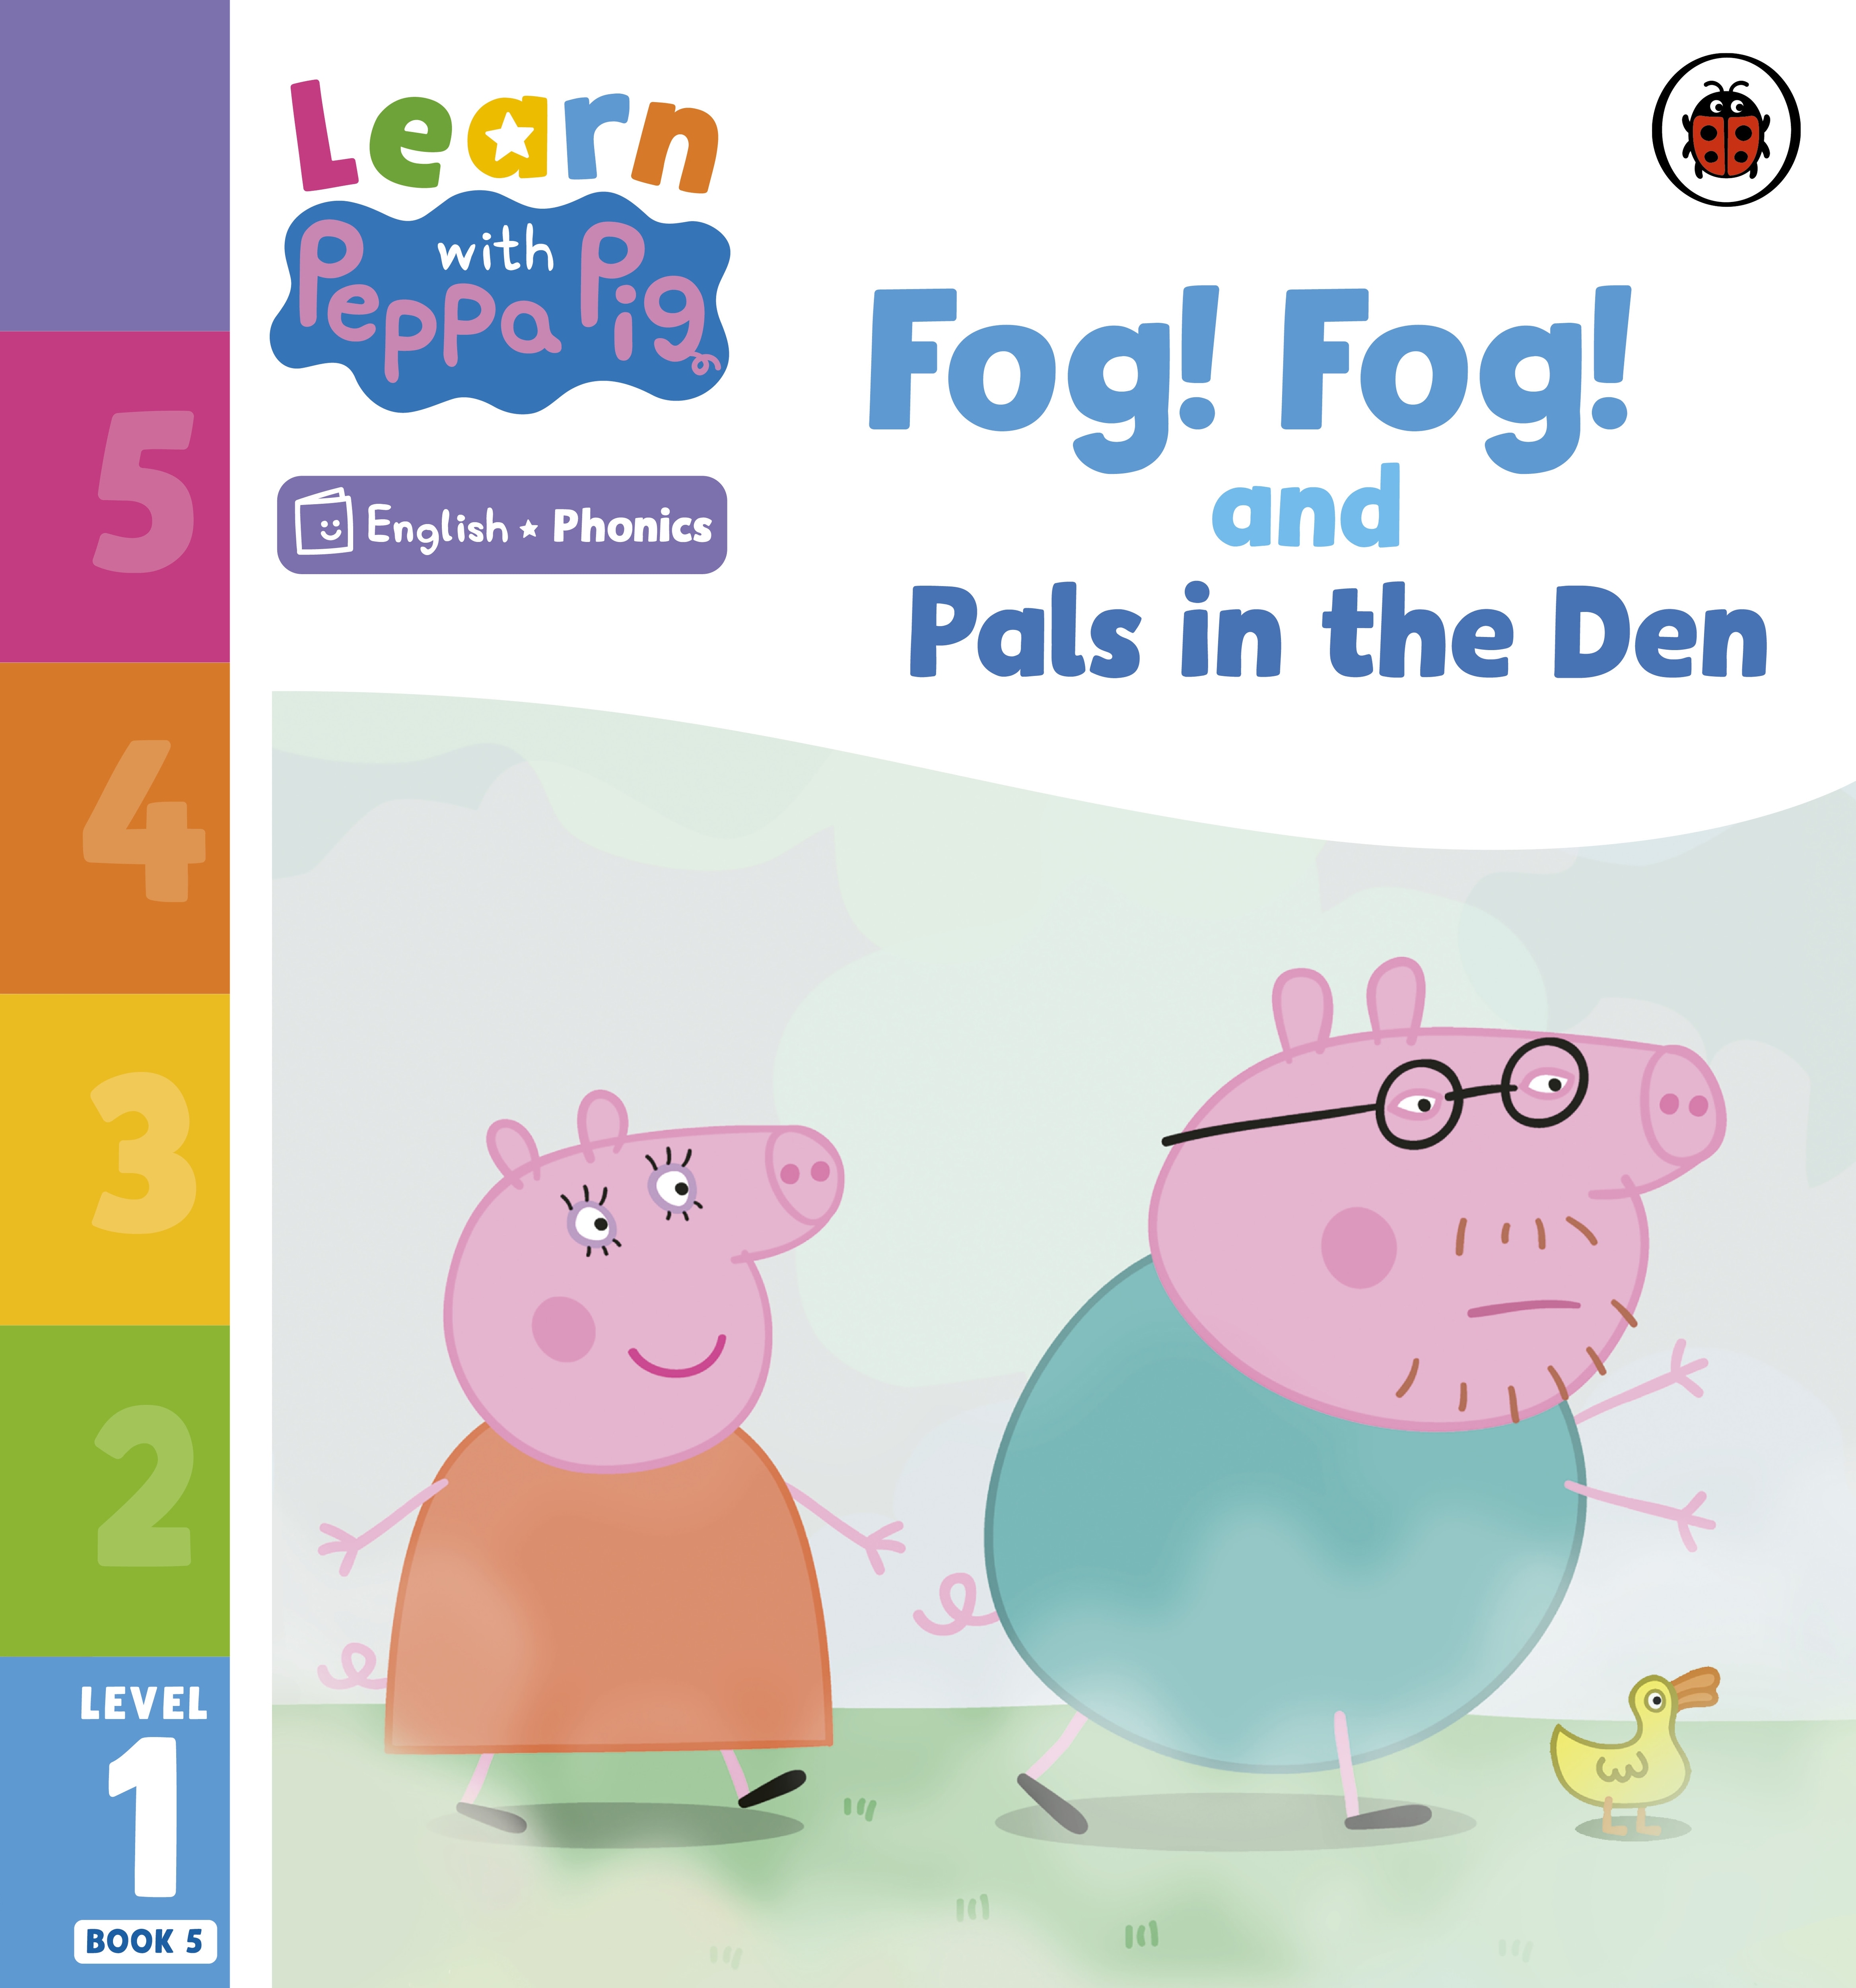 Book “Learn with Peppa Phonics Level 1 Book 5 — Fog! Fog! and In the Den (Phonics Reader)” by Peppa Pig — January 5, 2023